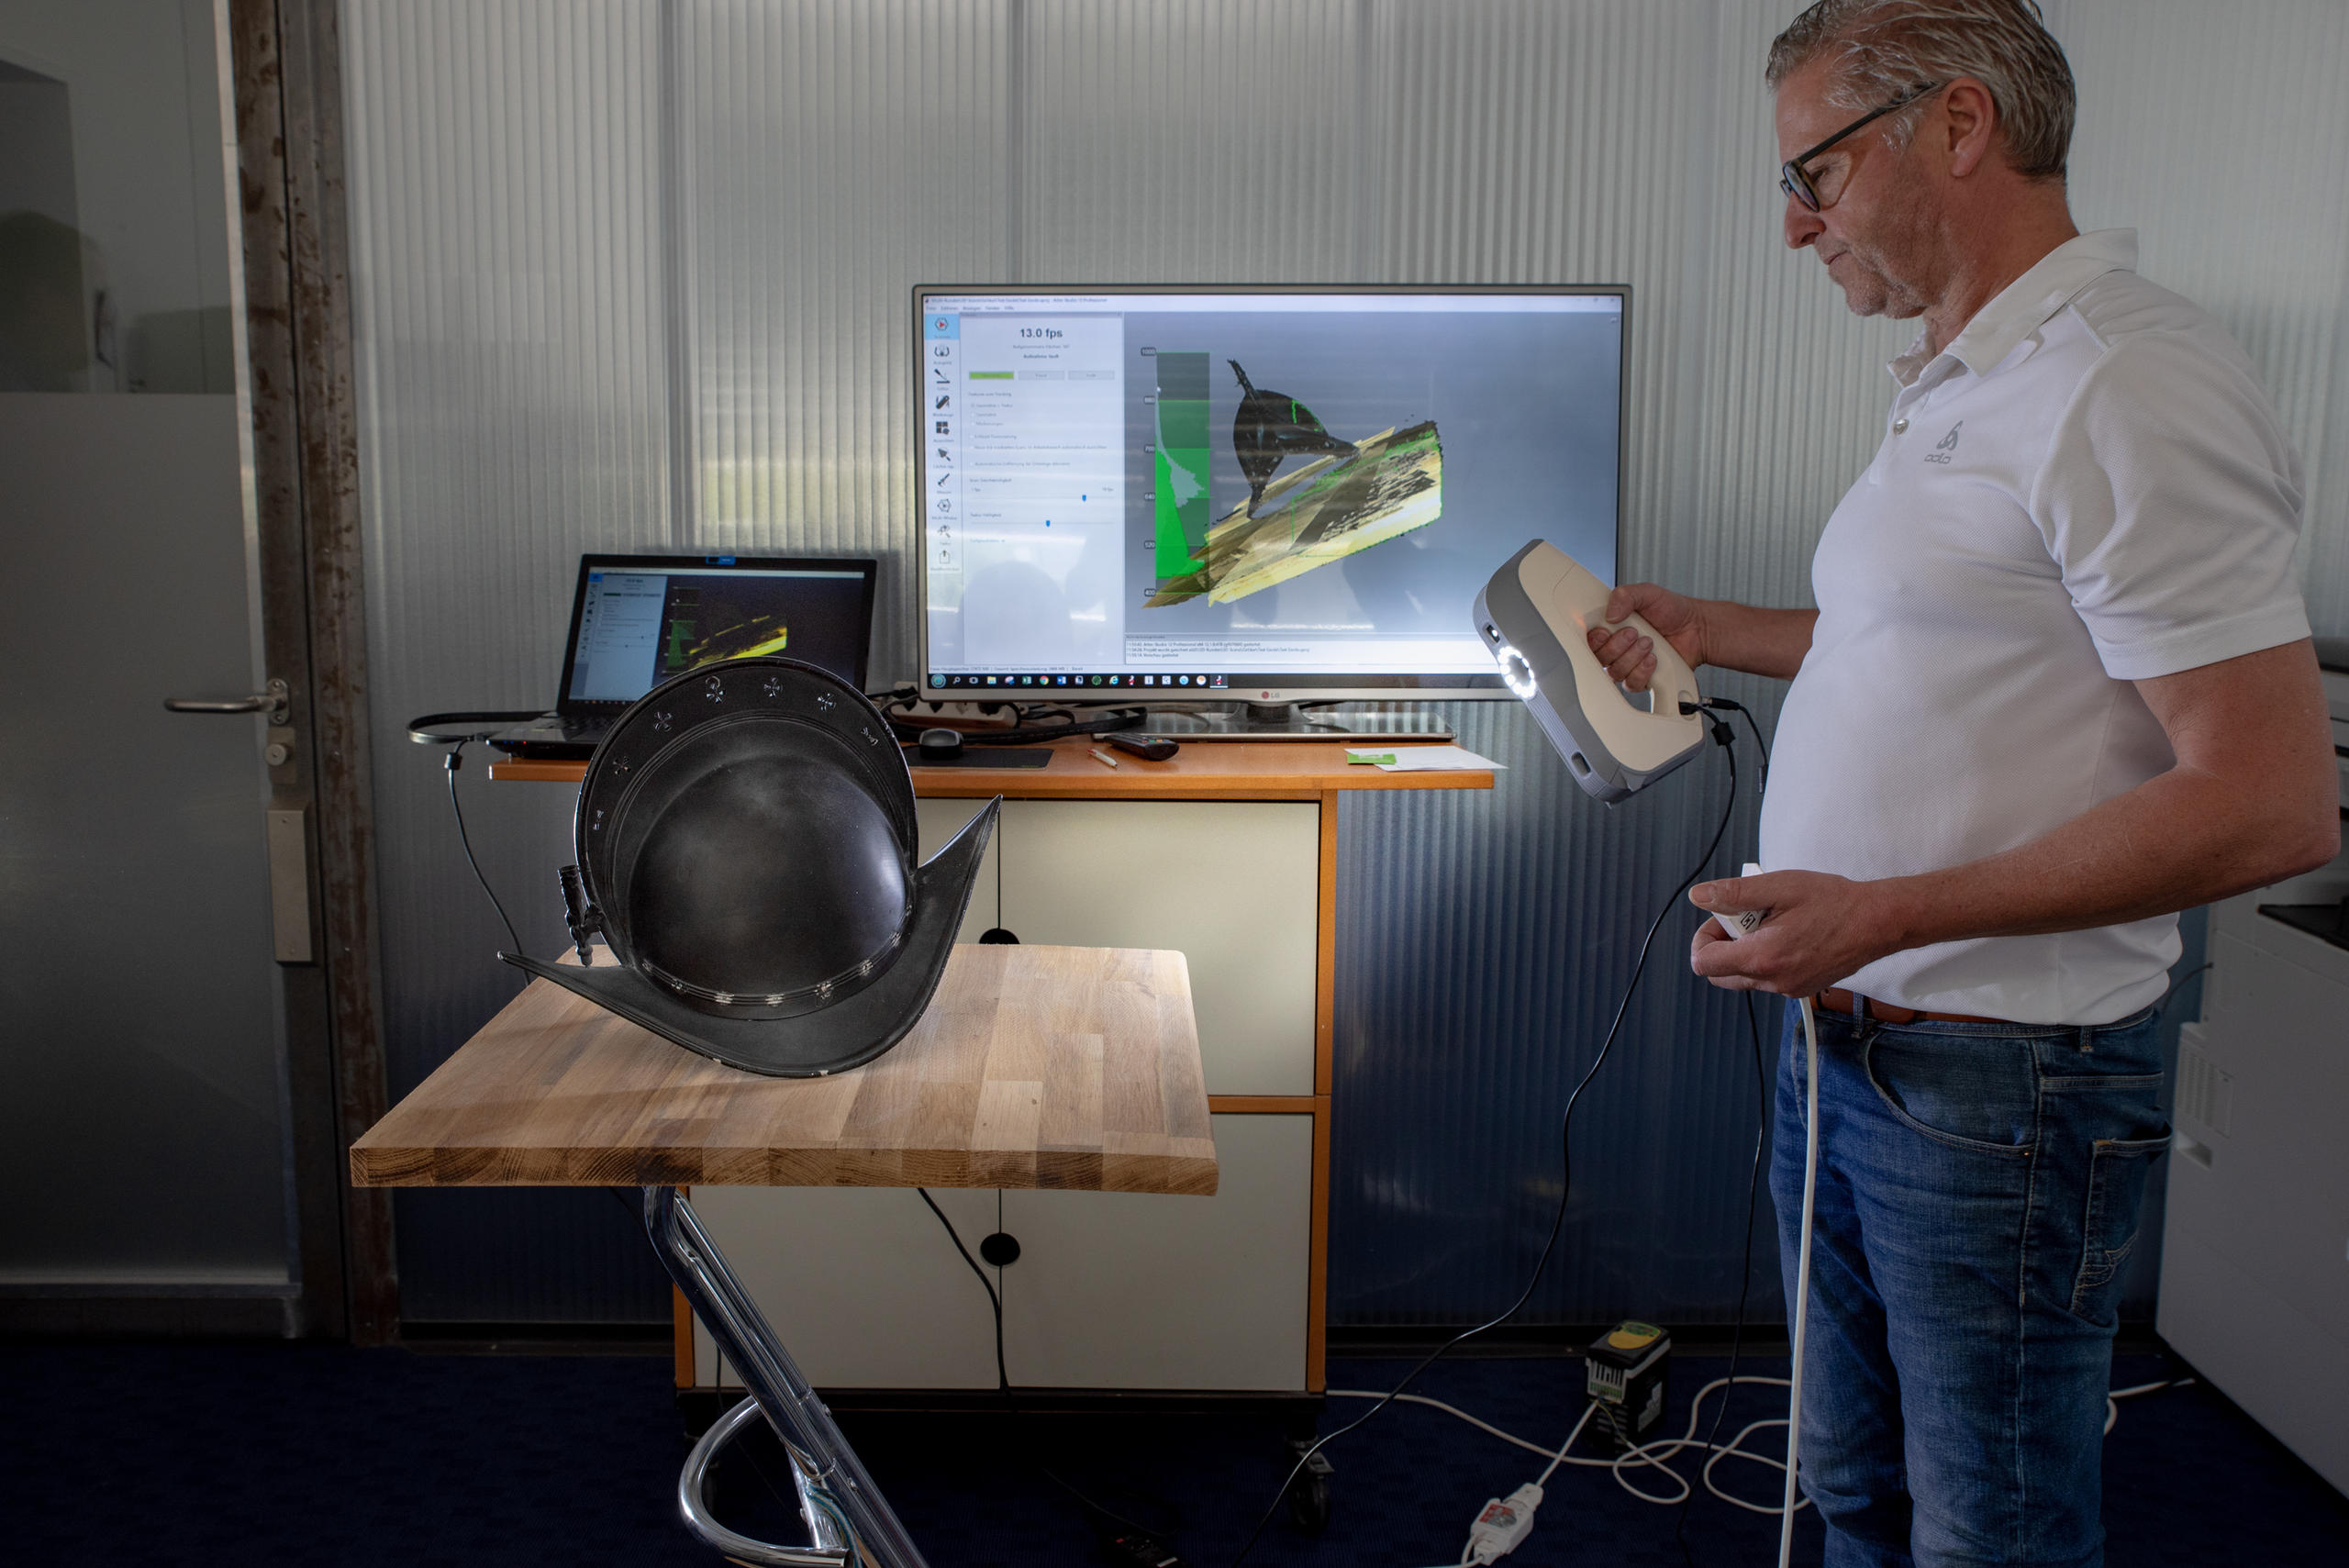 A man scans a helmet which is standing on a table, with a computer screen in the background.